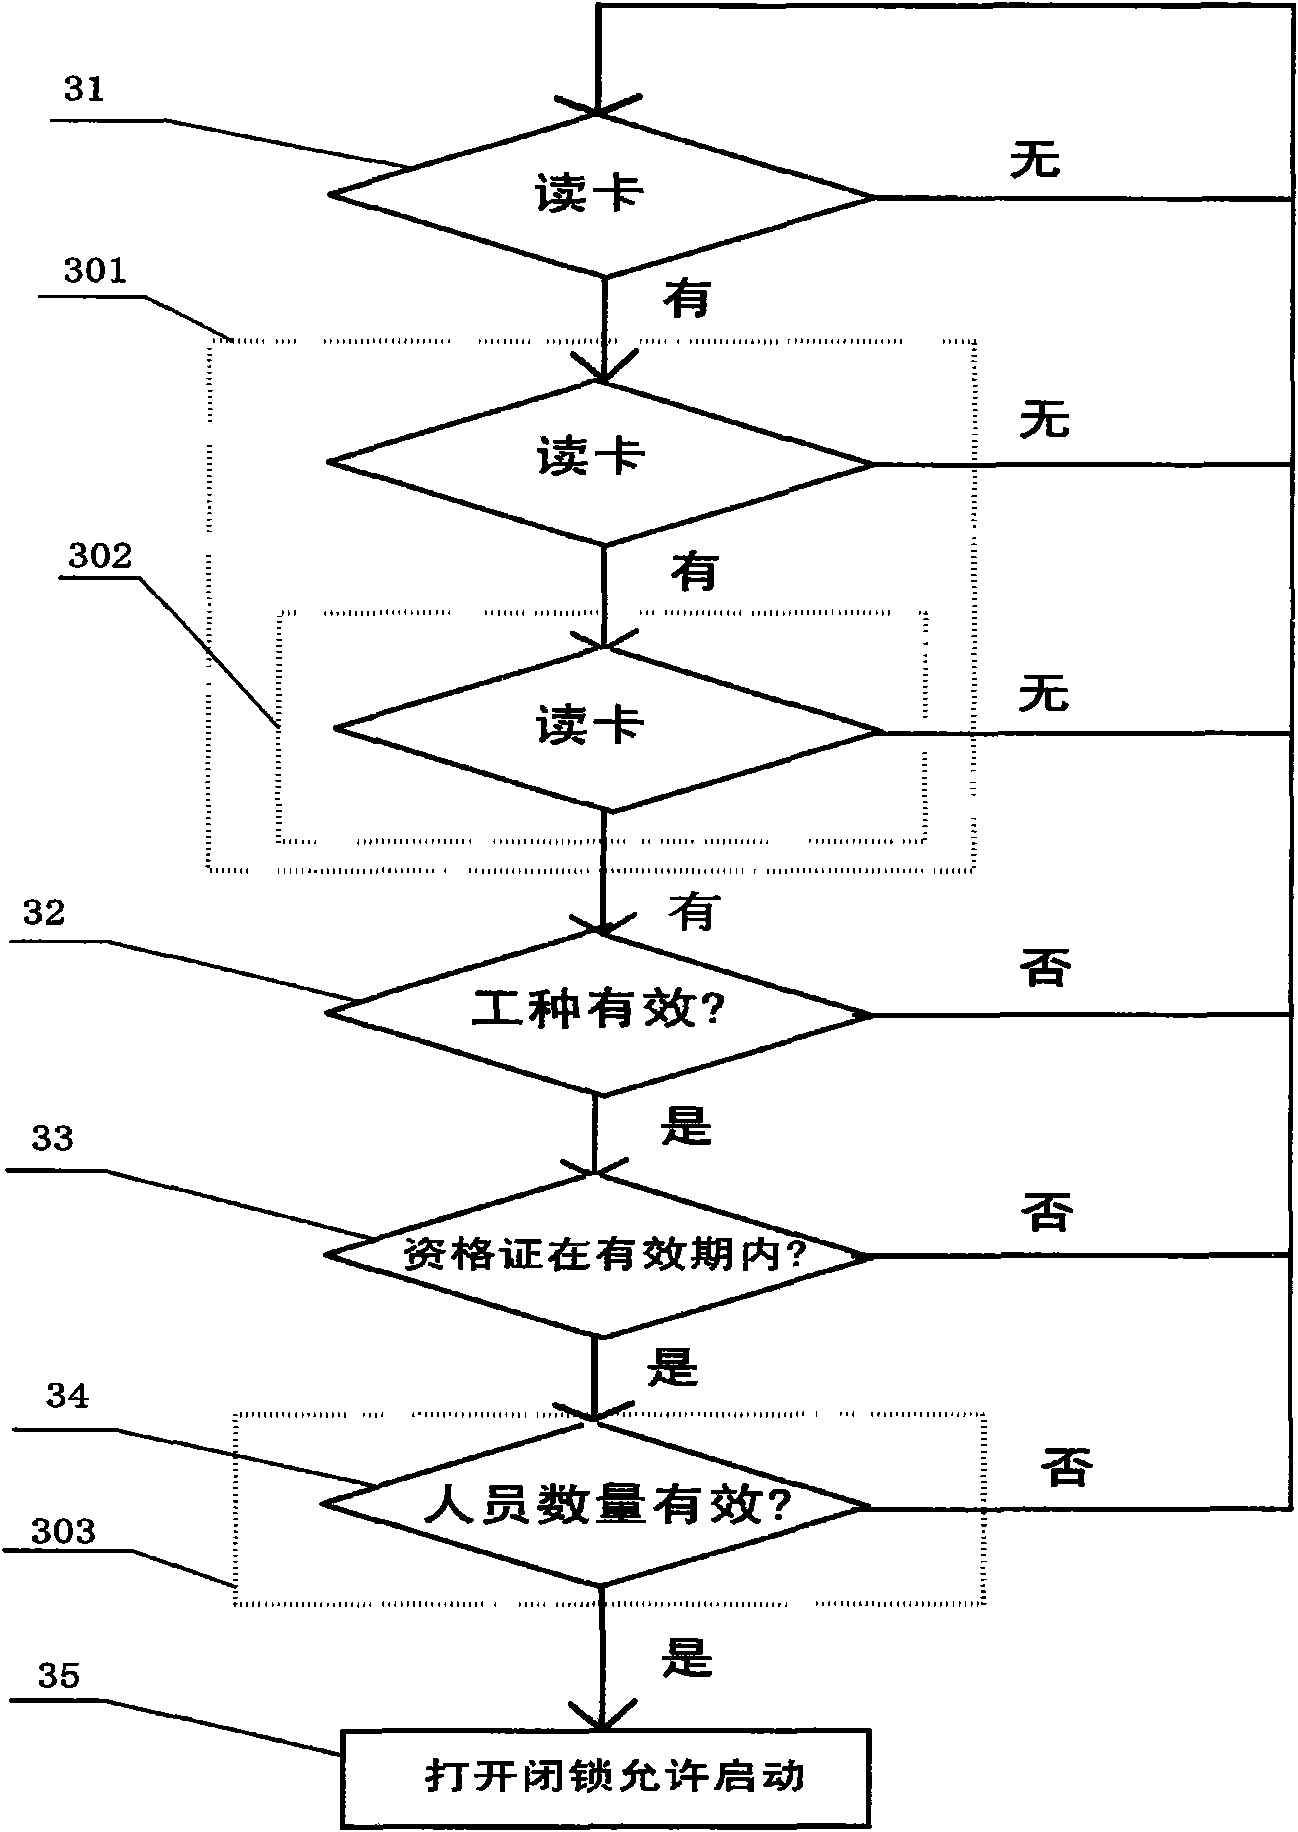 Card-reading circuit controller for special equipment operating personnel